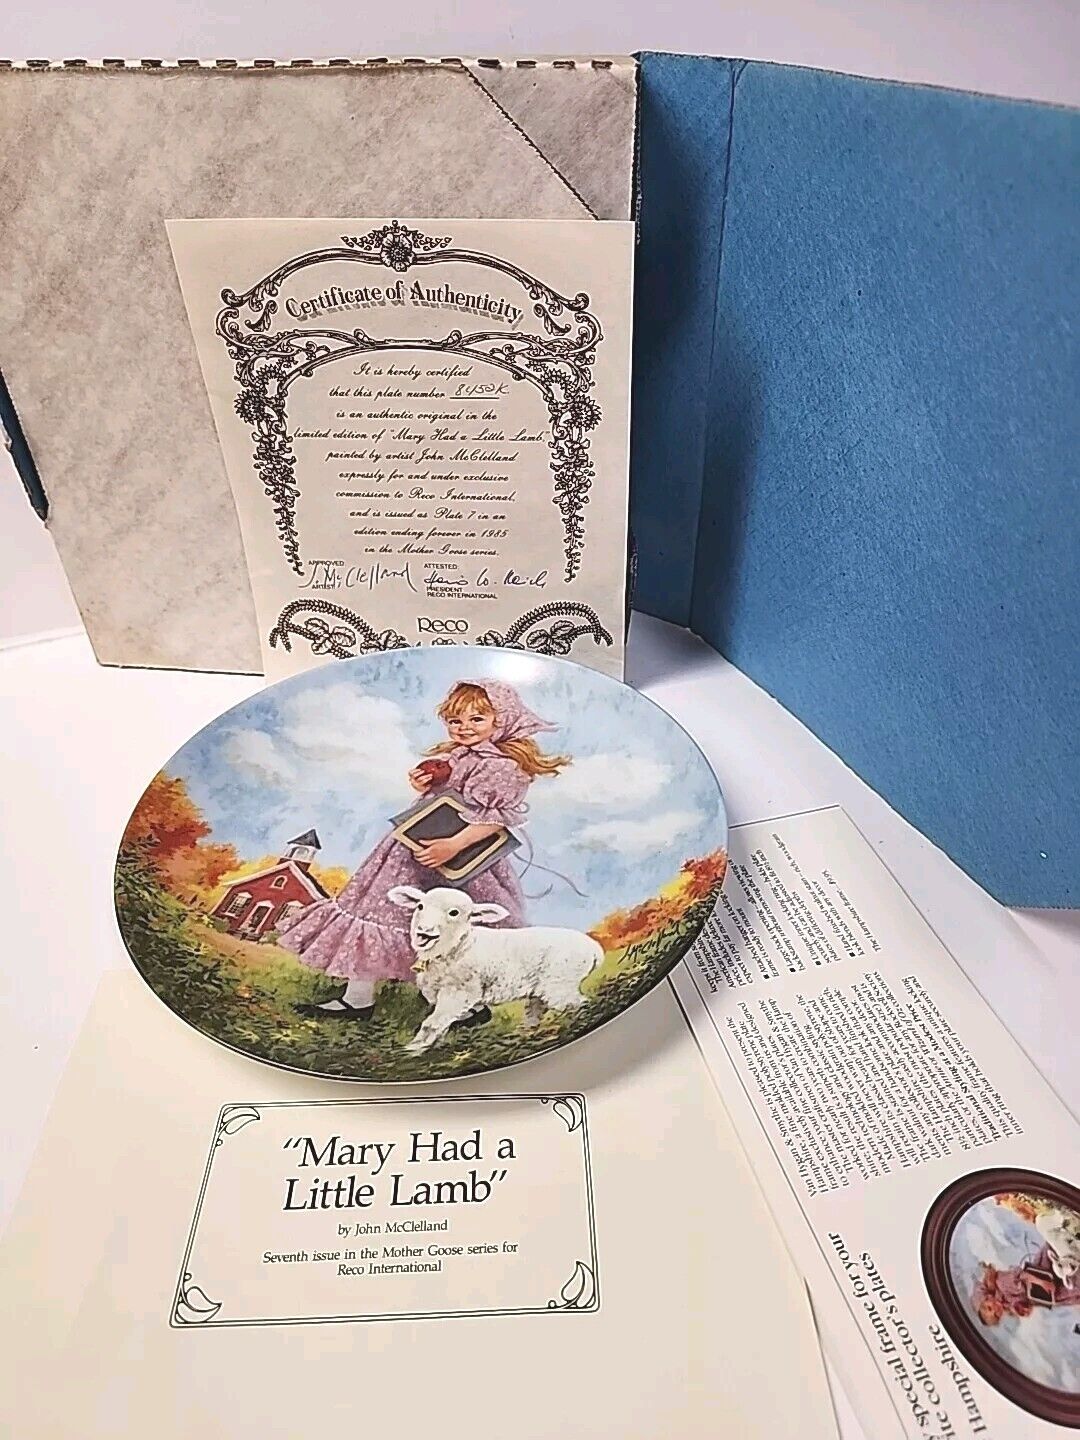 RECO 1985 Mary Had a Little Lamb Mother Goose collector plate by John McClelland